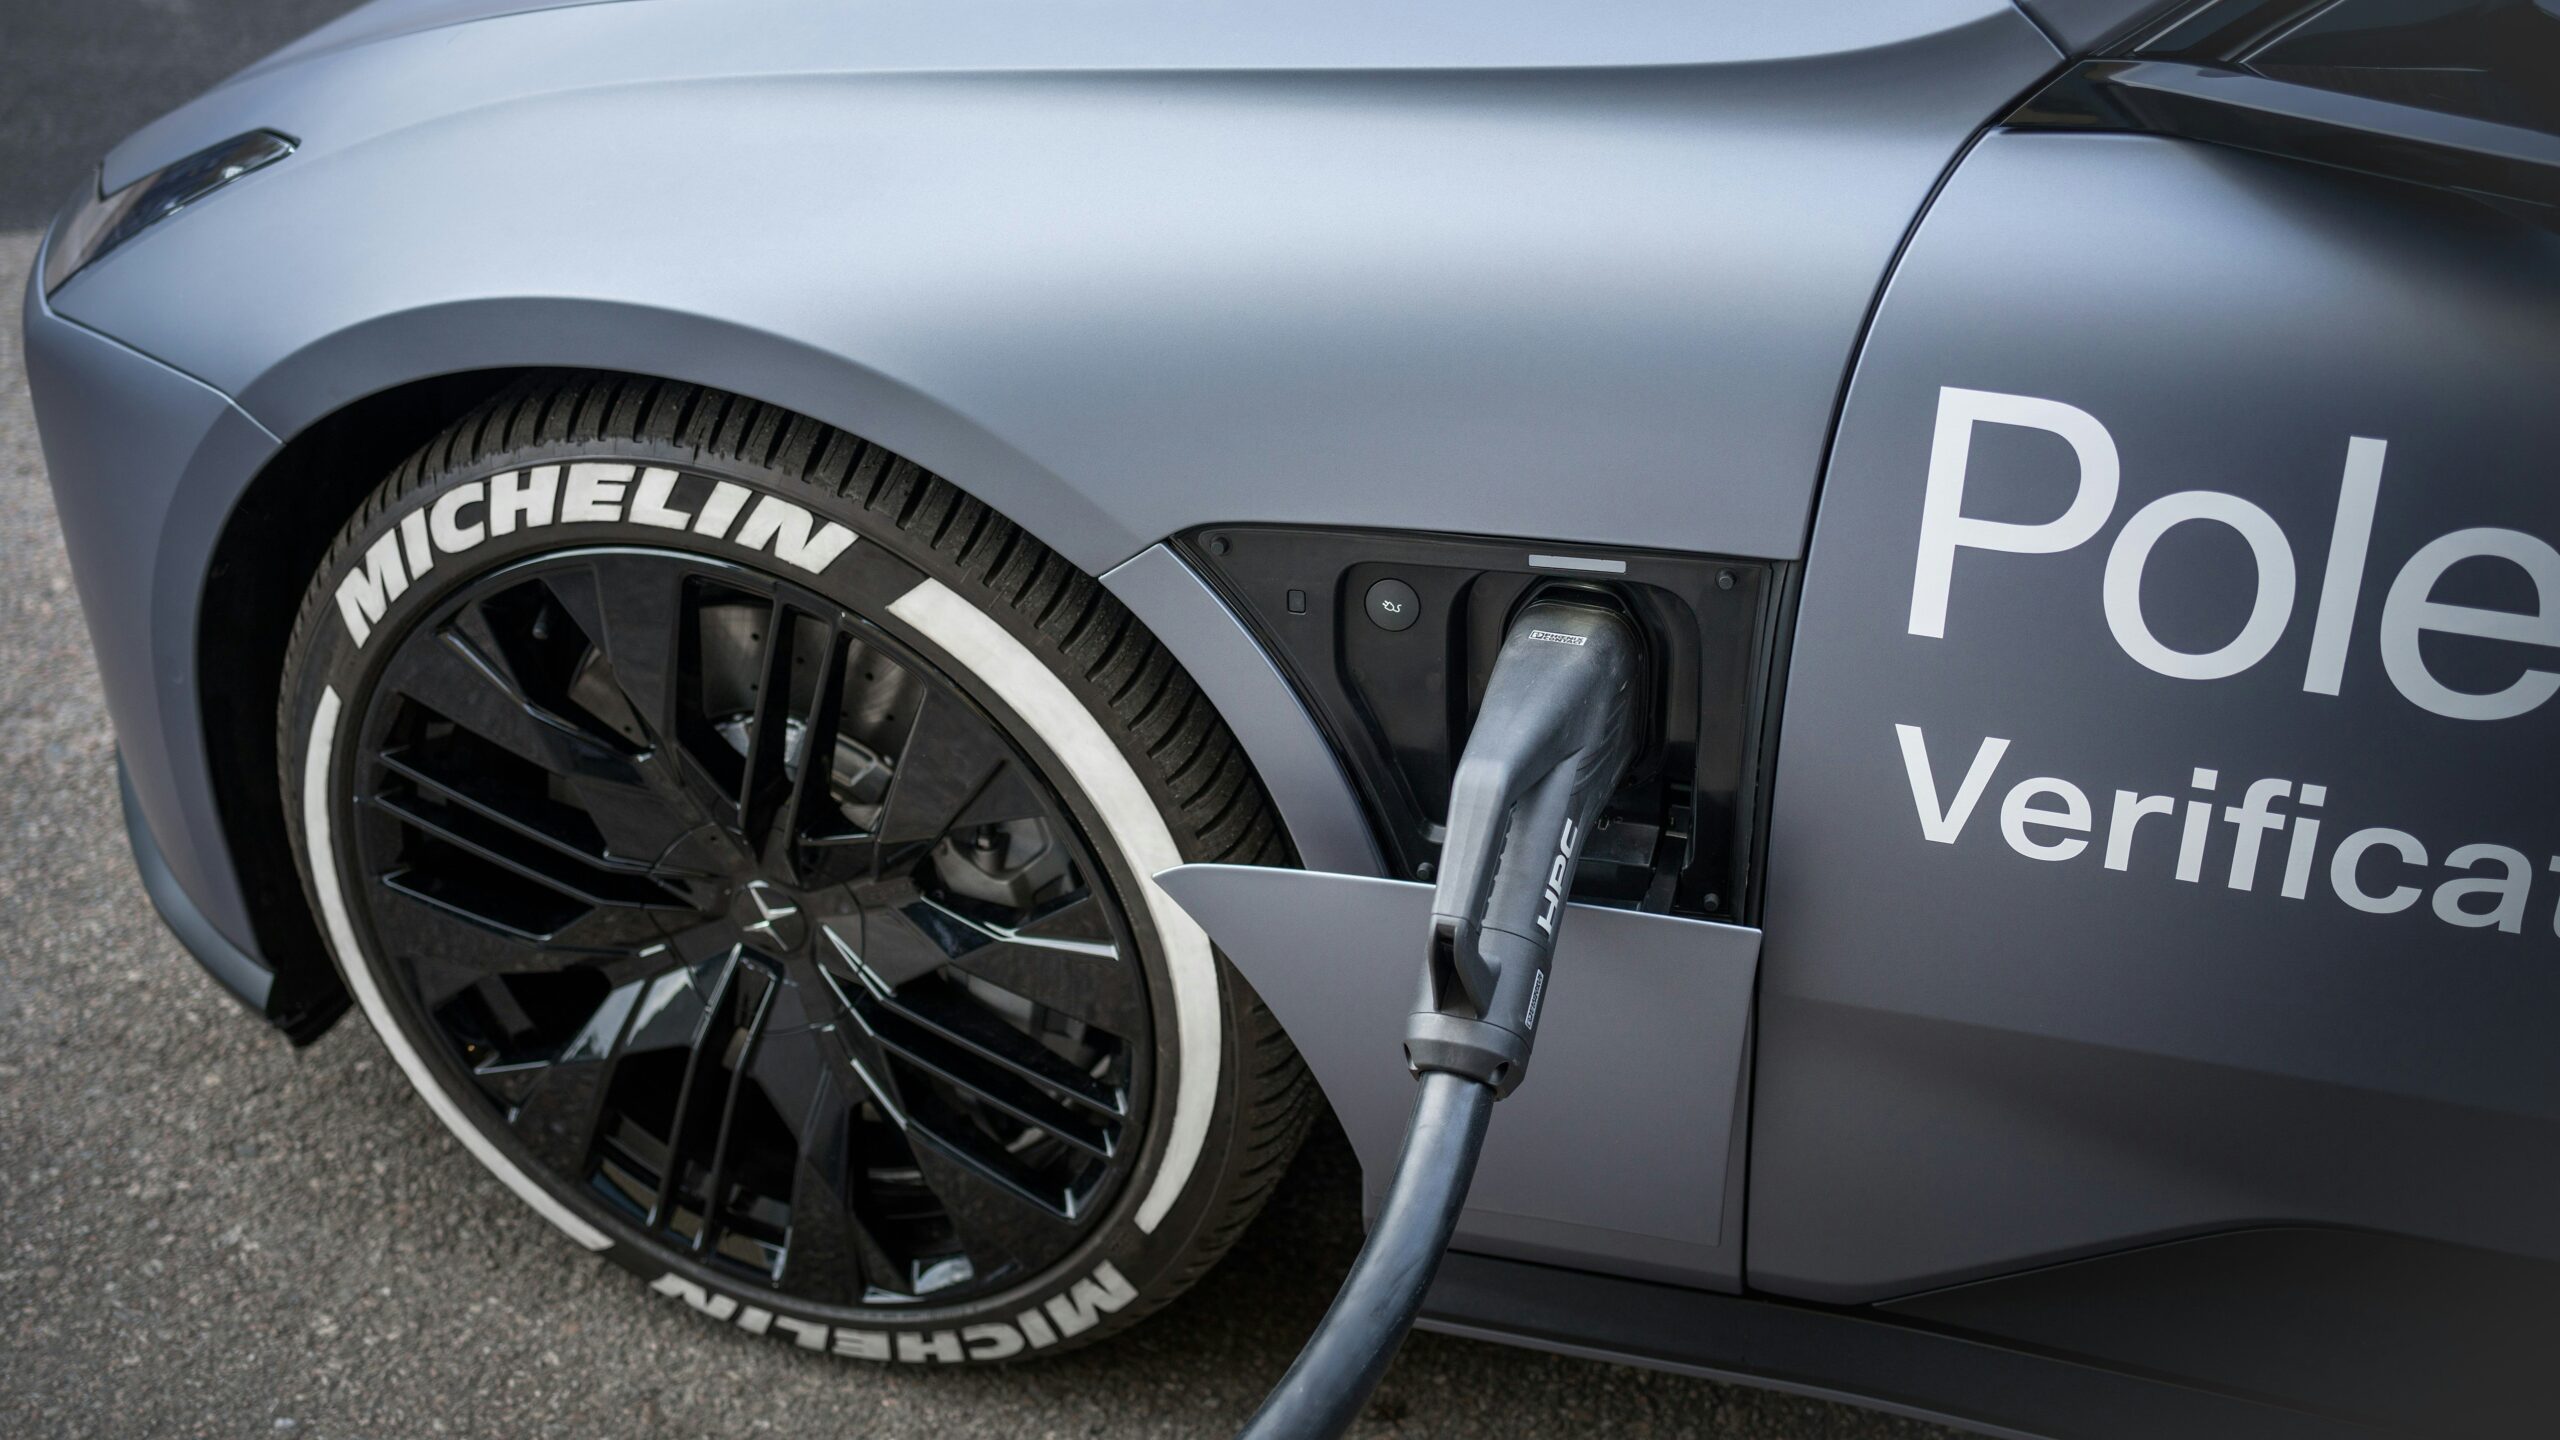 Polestar Shows Off EV That Can Charge fFom 10 to 80 Percent in 10 Minutes